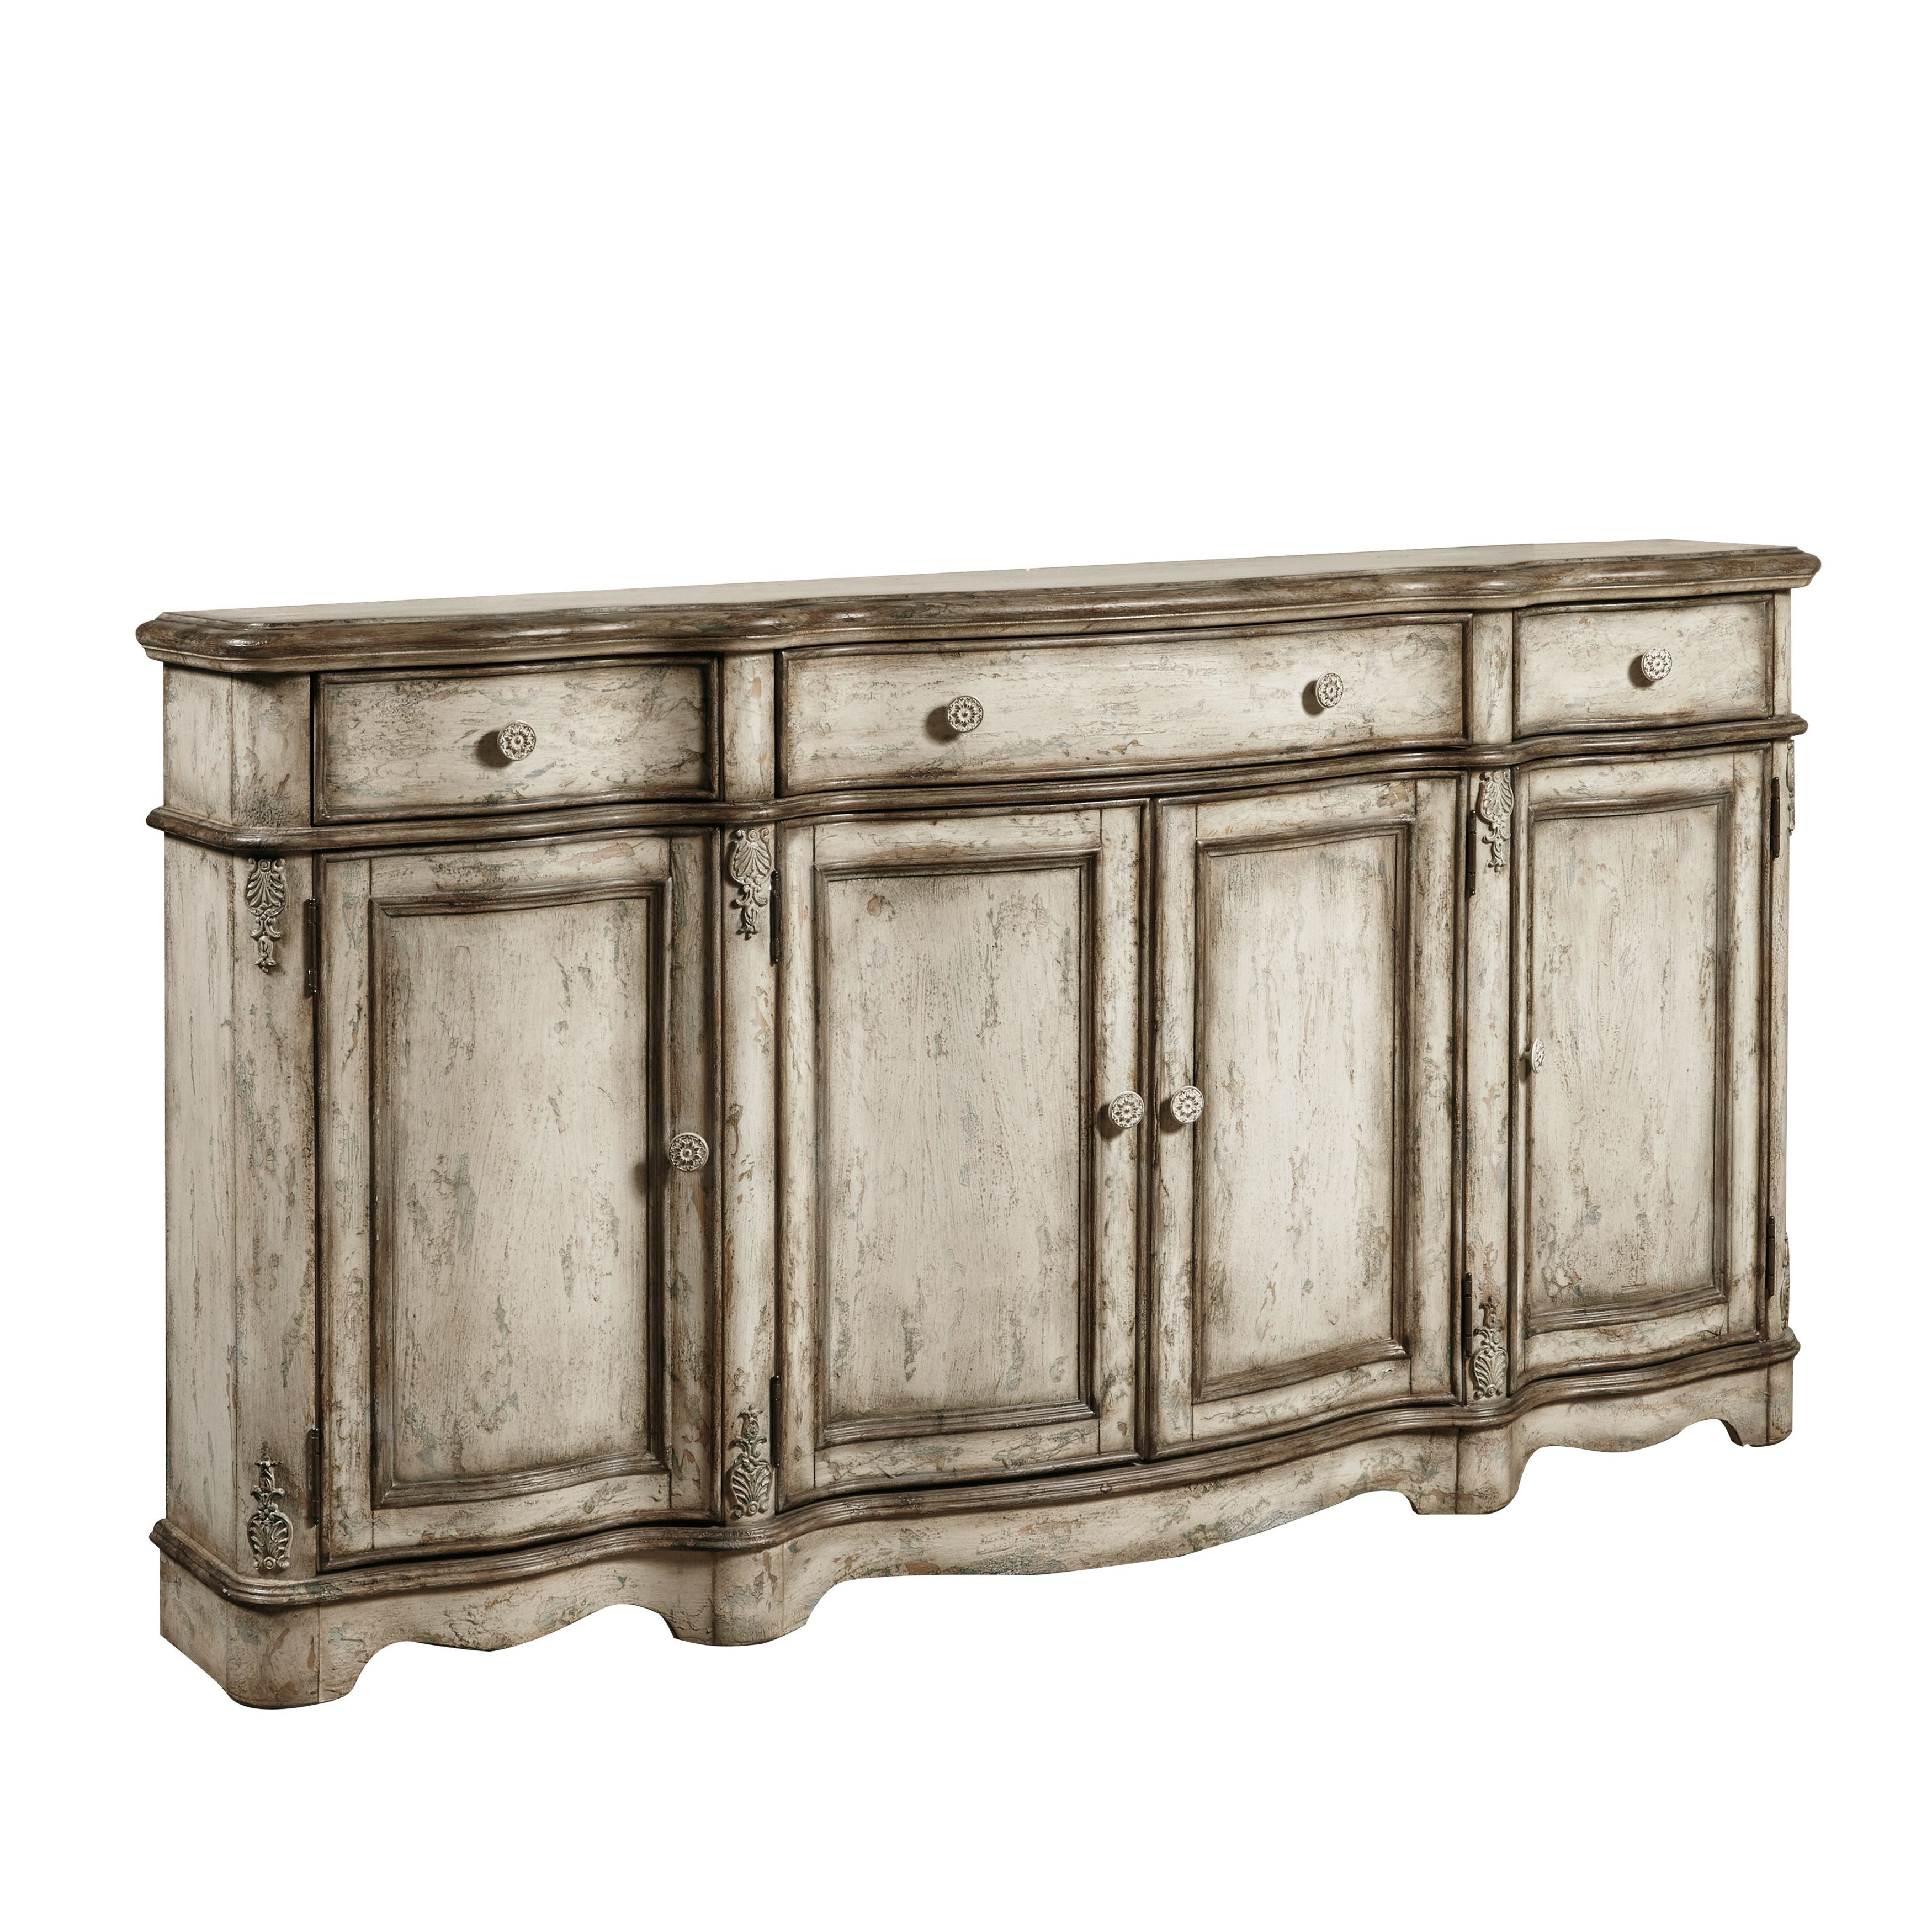 Farmhouse & Rustic Sideboards & Buffets | Birch Lane Inside Amityville Sideboards (View 12 of 20)